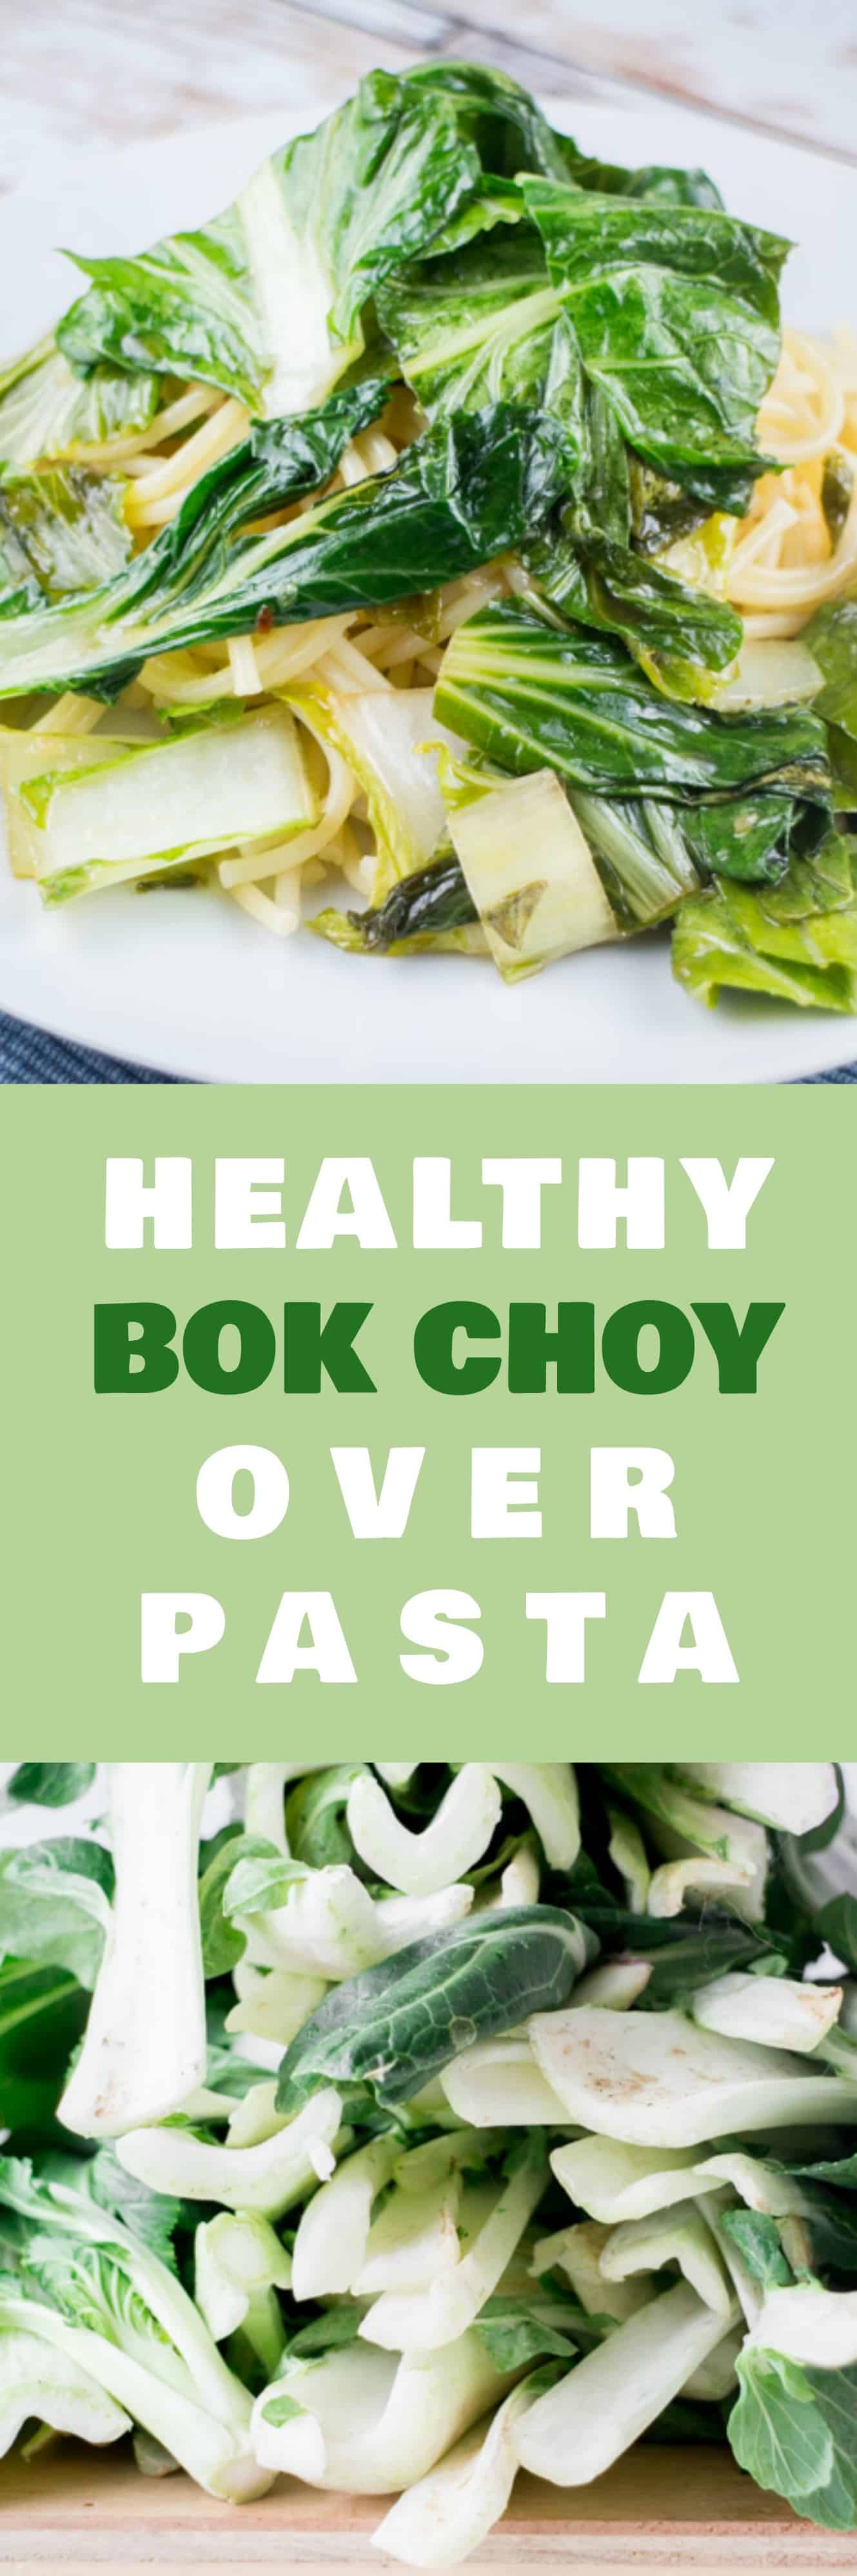 Easy, healthy Bok Choy and Garlic Over Pasta recipe that you can throw together in minutes!   The bok choy tastes great in this olive oil and garlic sauce!